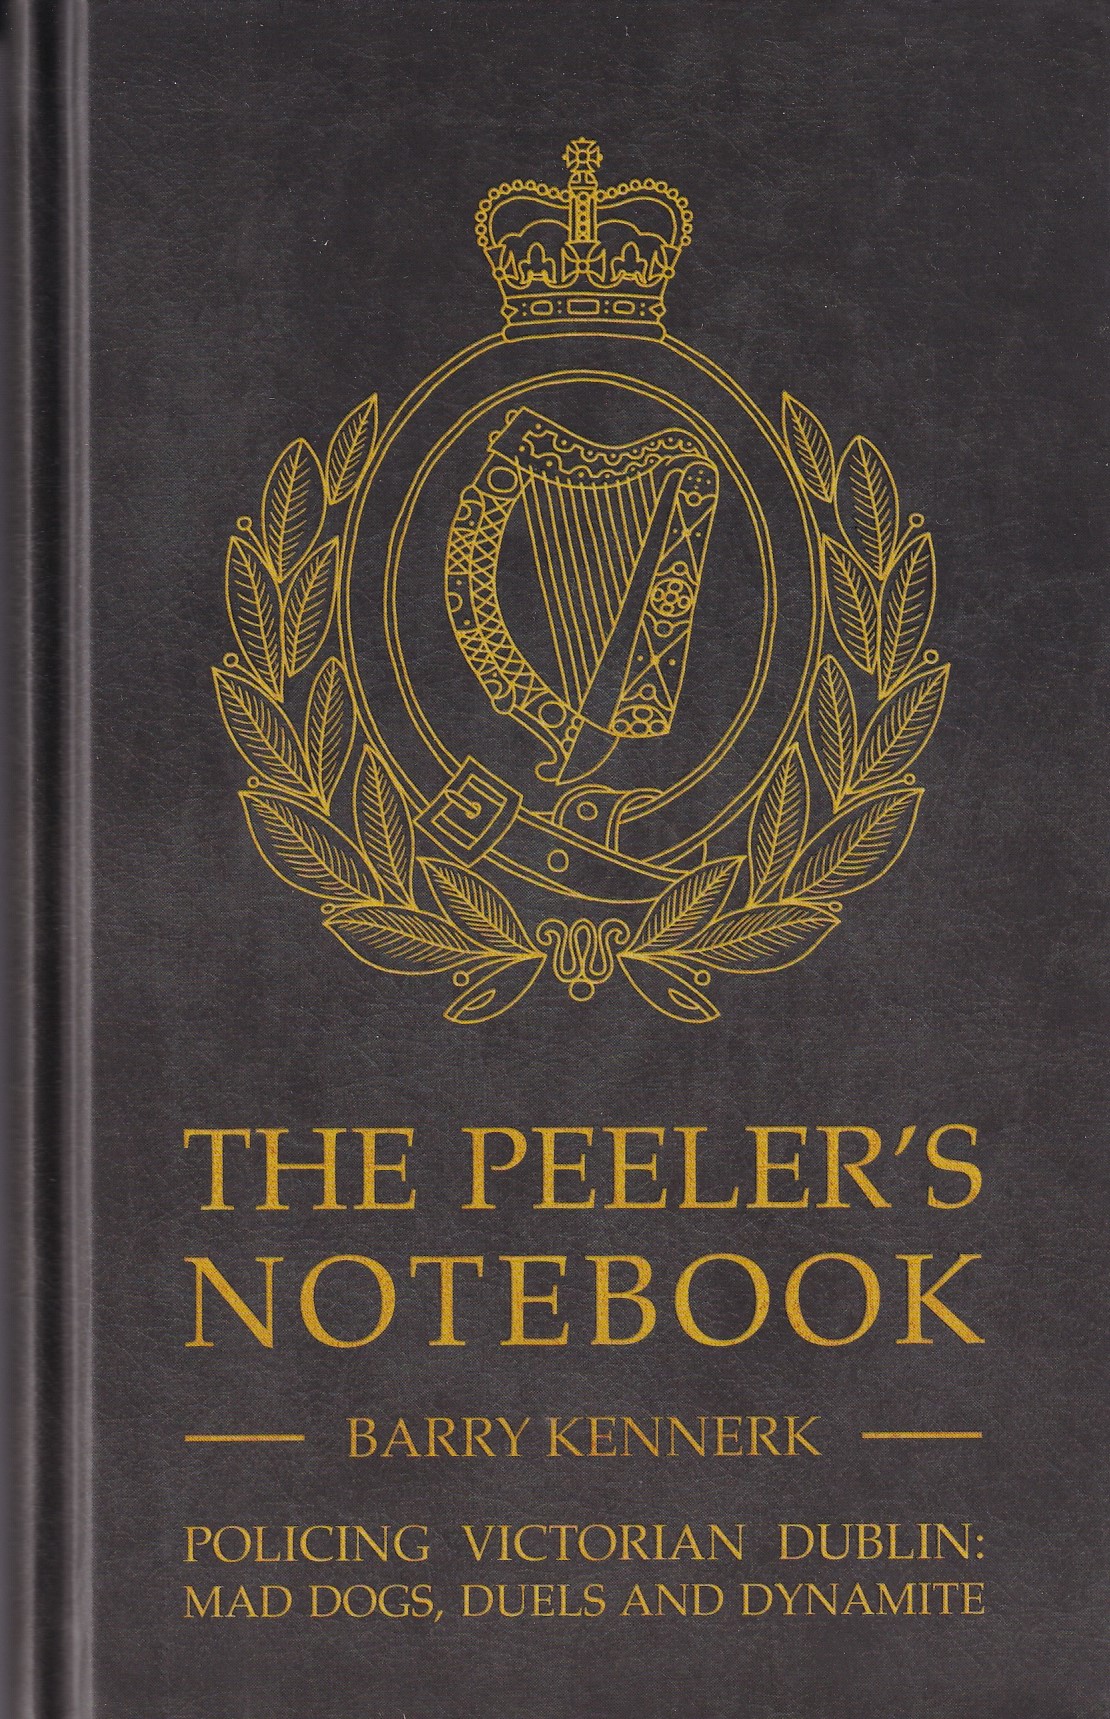 The Peelers Notebook, Policing Victorian Dublin: Mad Dogs, Duels and Dynamite | Kennerk, Barry | Charlie Byrne's